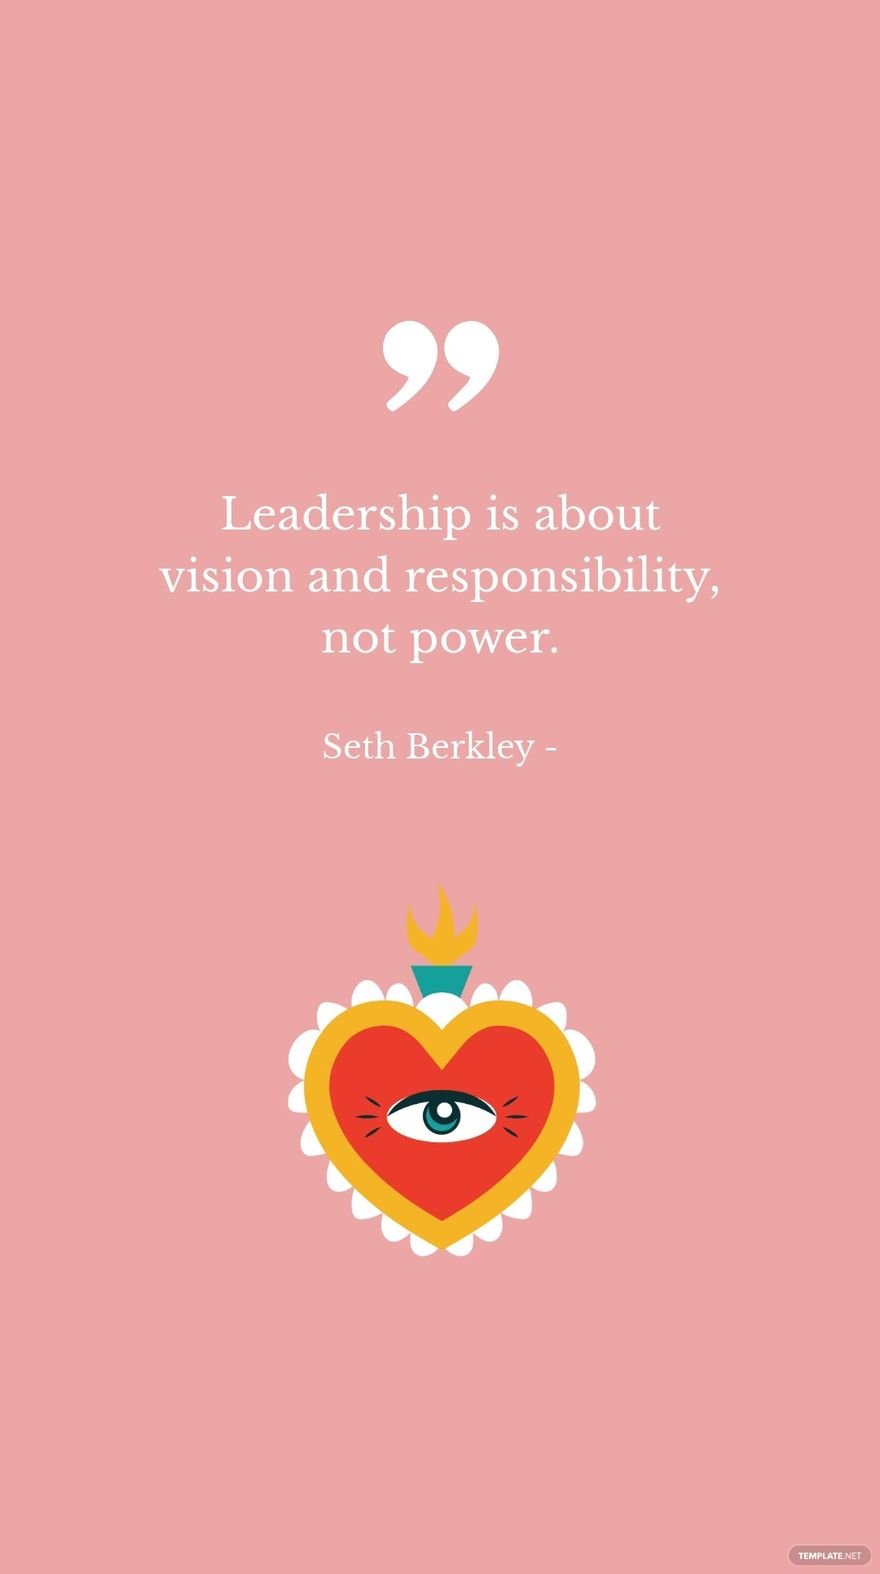 Free Seth Berkley - Leadership is about vision and responsibility, not power. in JPG